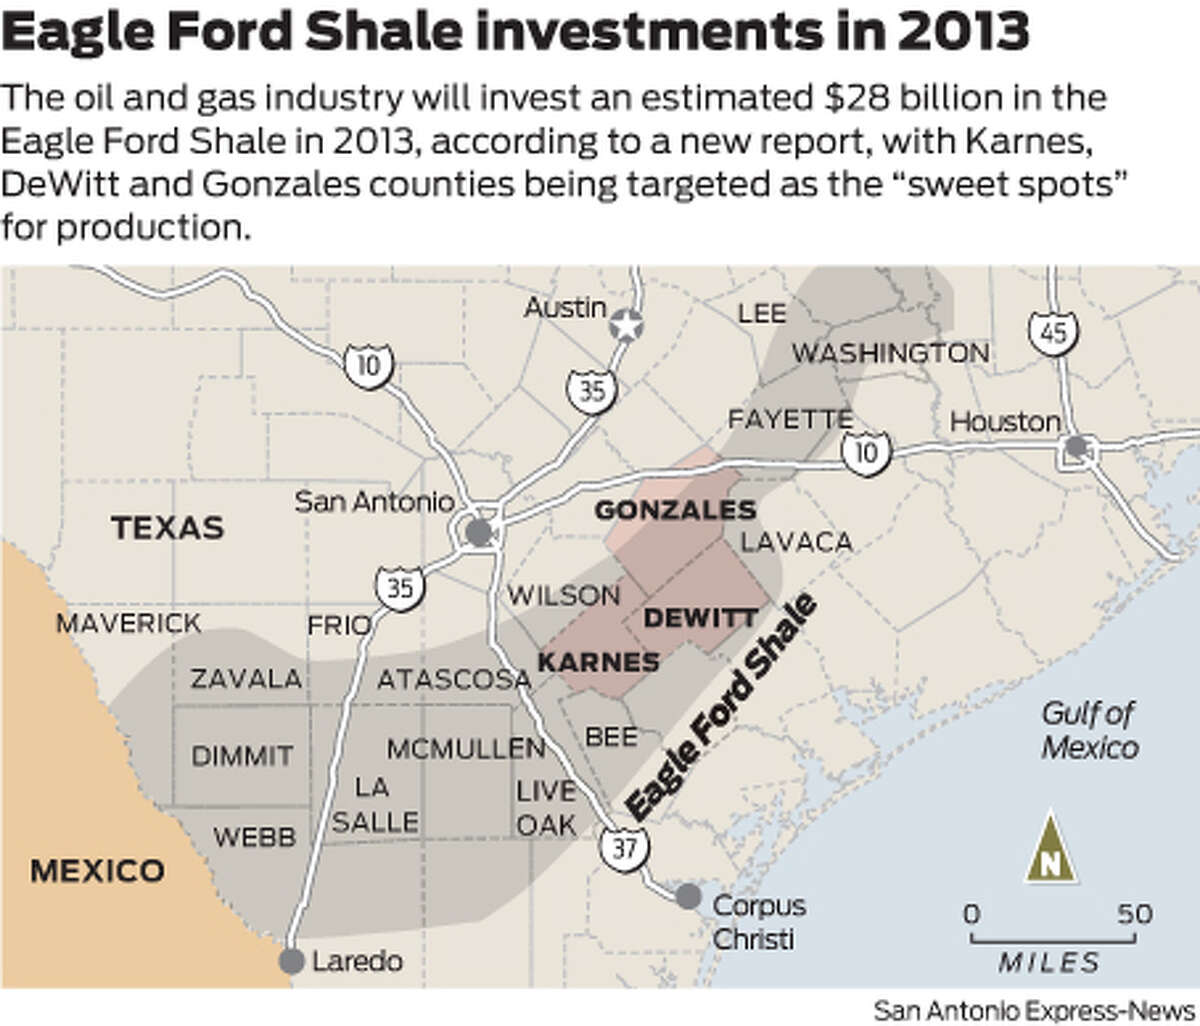 The oil and gas industry will invest an estimated $28 billion in the Eagle Ford Shale in 2013, according to a new report, with Karnes, DeWitt and Gonzales counties being targeted as the “sweet spots” for production.